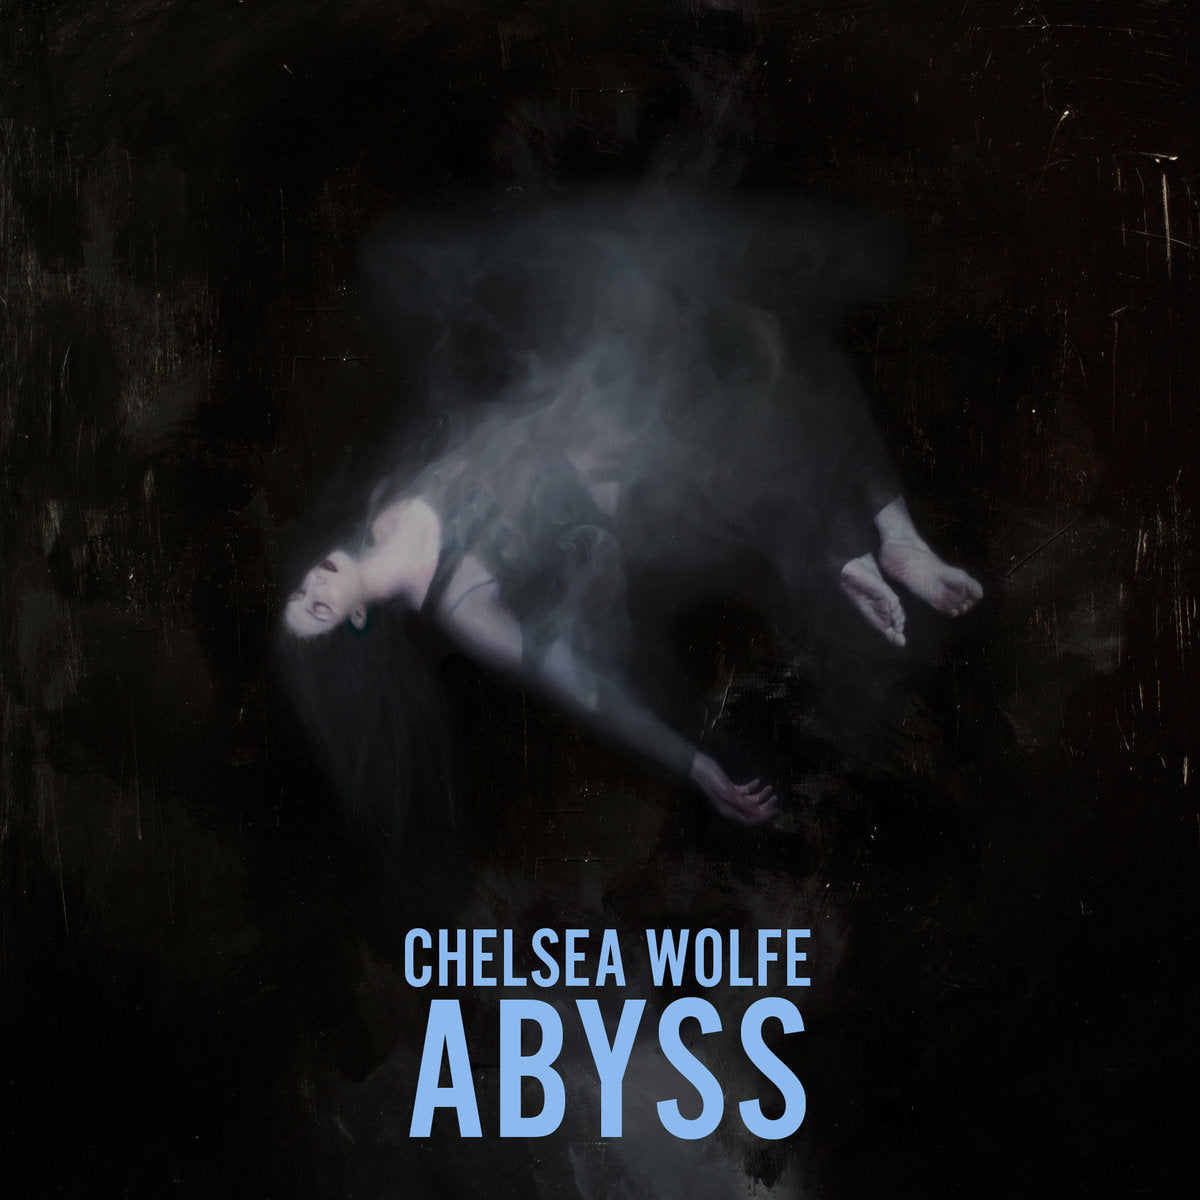 CHELSEA WOLFE "Abyss" CD